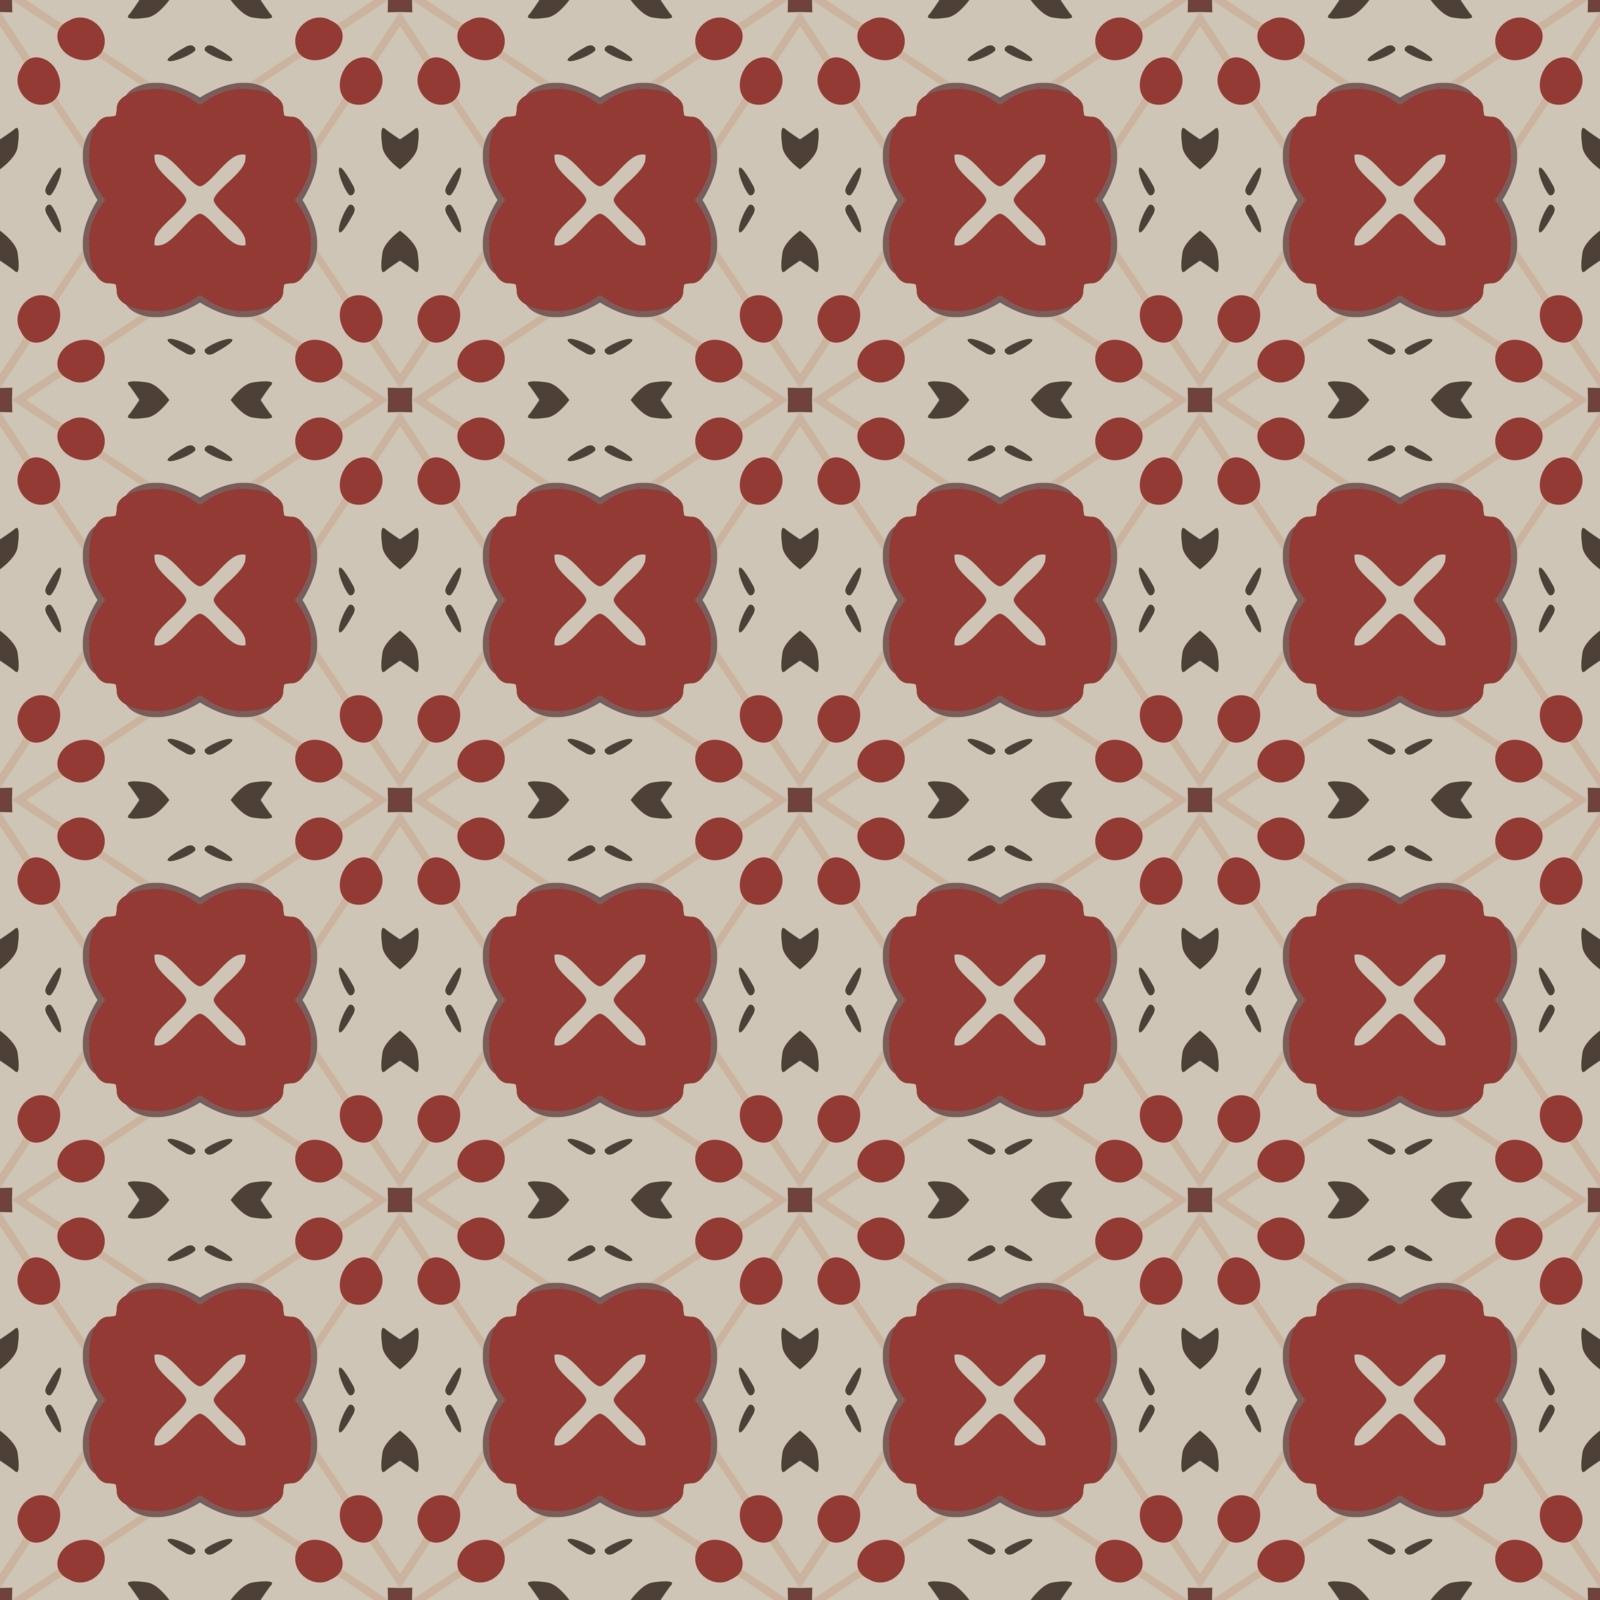 Seamless illustrated pattern made of abstract elements in beige, red and dark gray